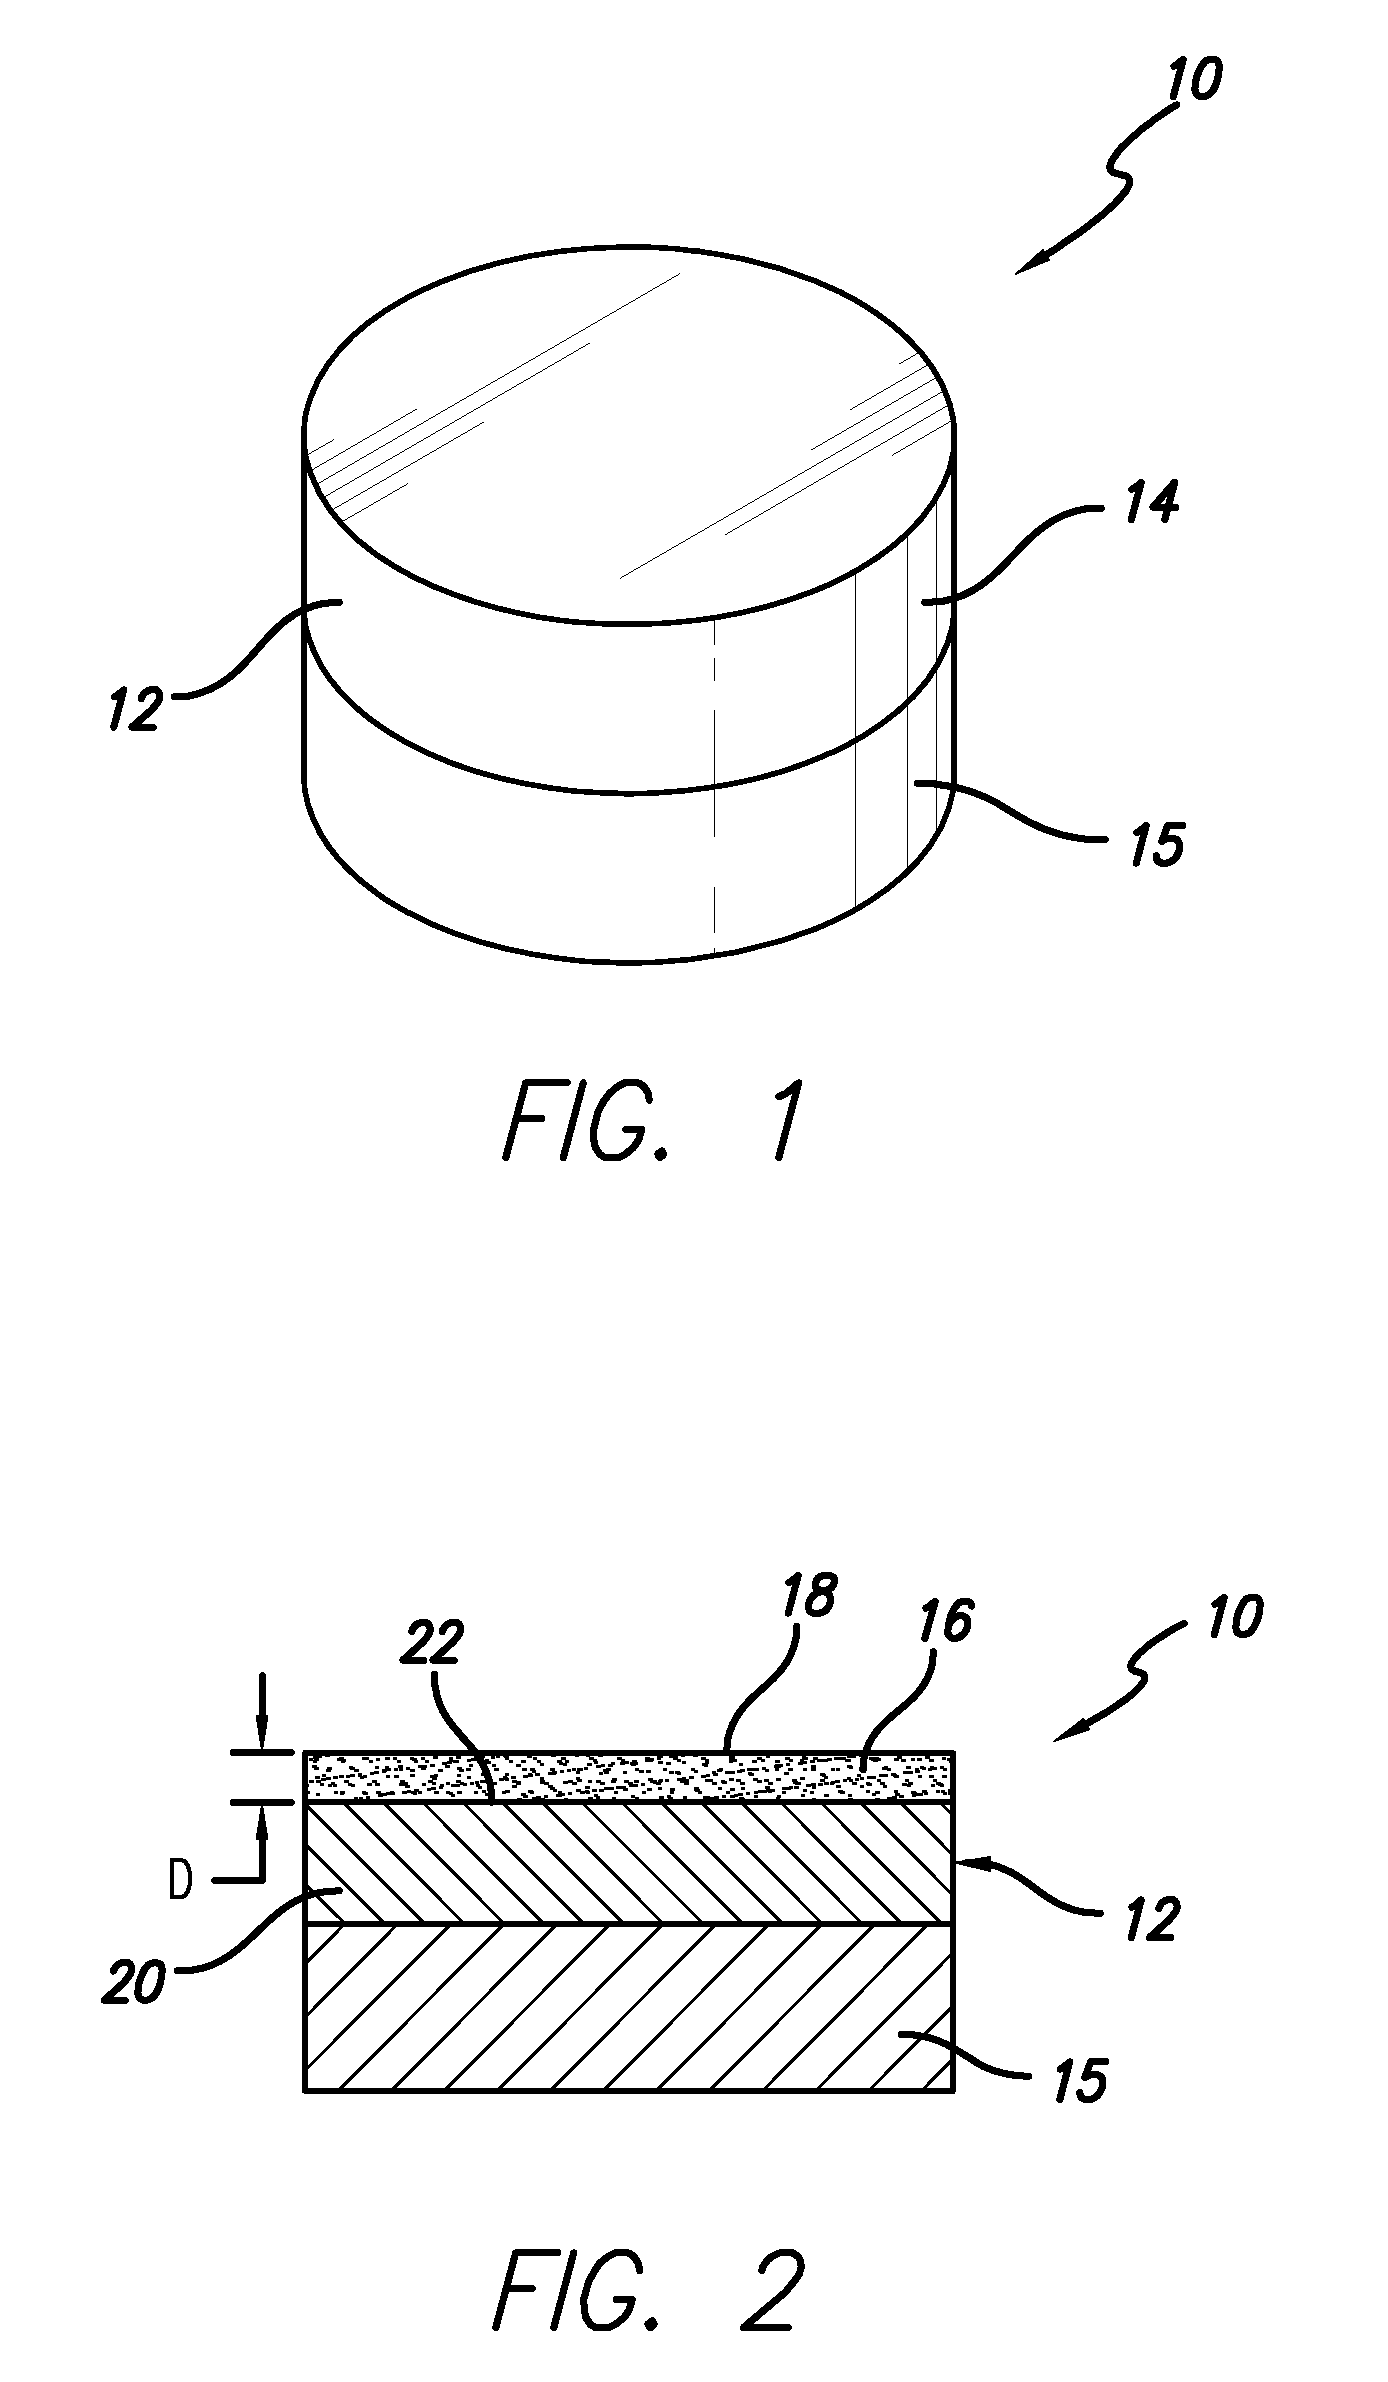 Nondestructive Device and Method for Evaluating Ultra-Hard Polycrystalline Constructions